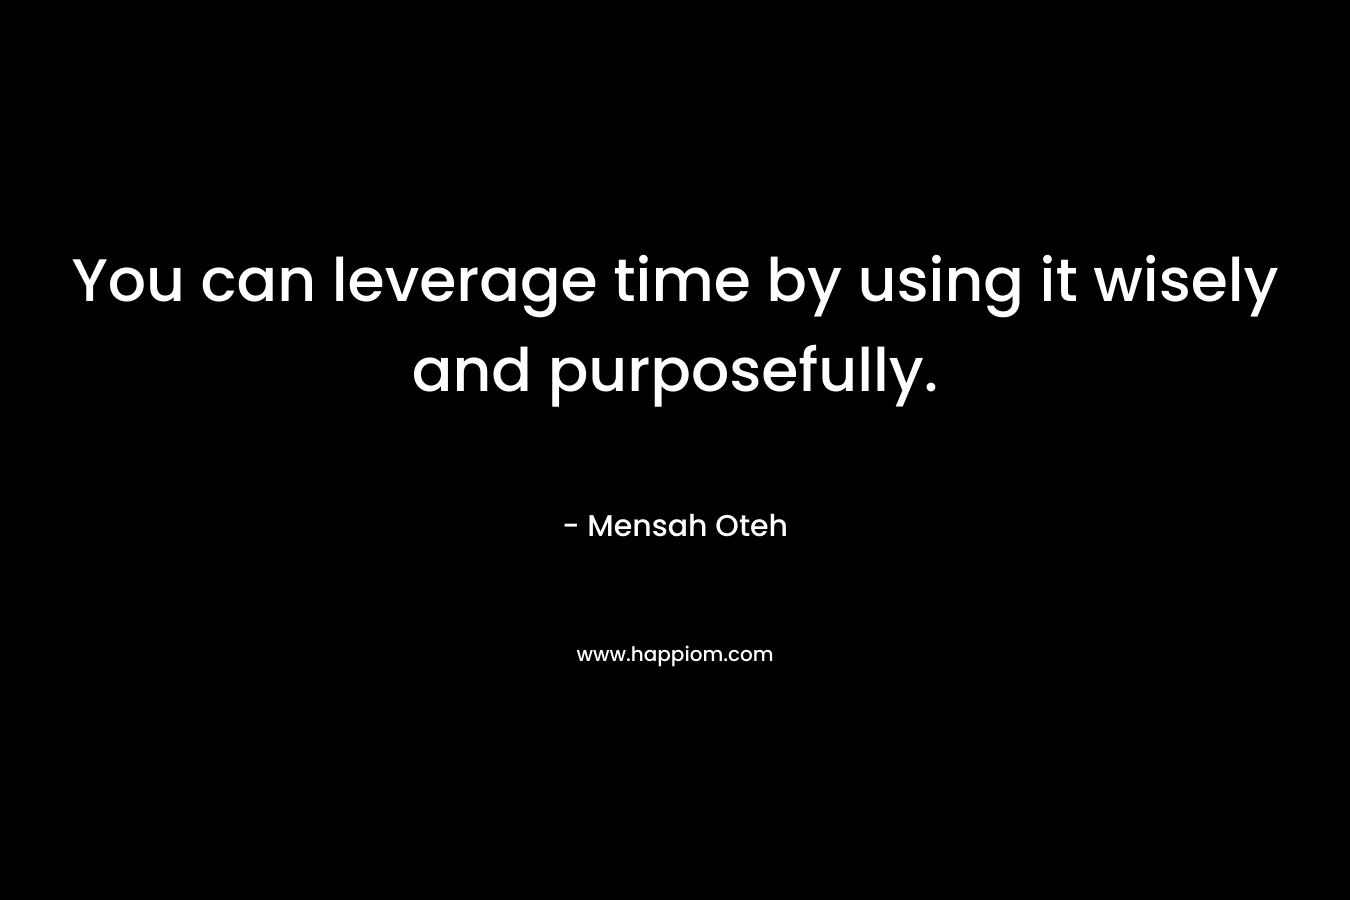 You can leverage time by using it wisely and purposefully.